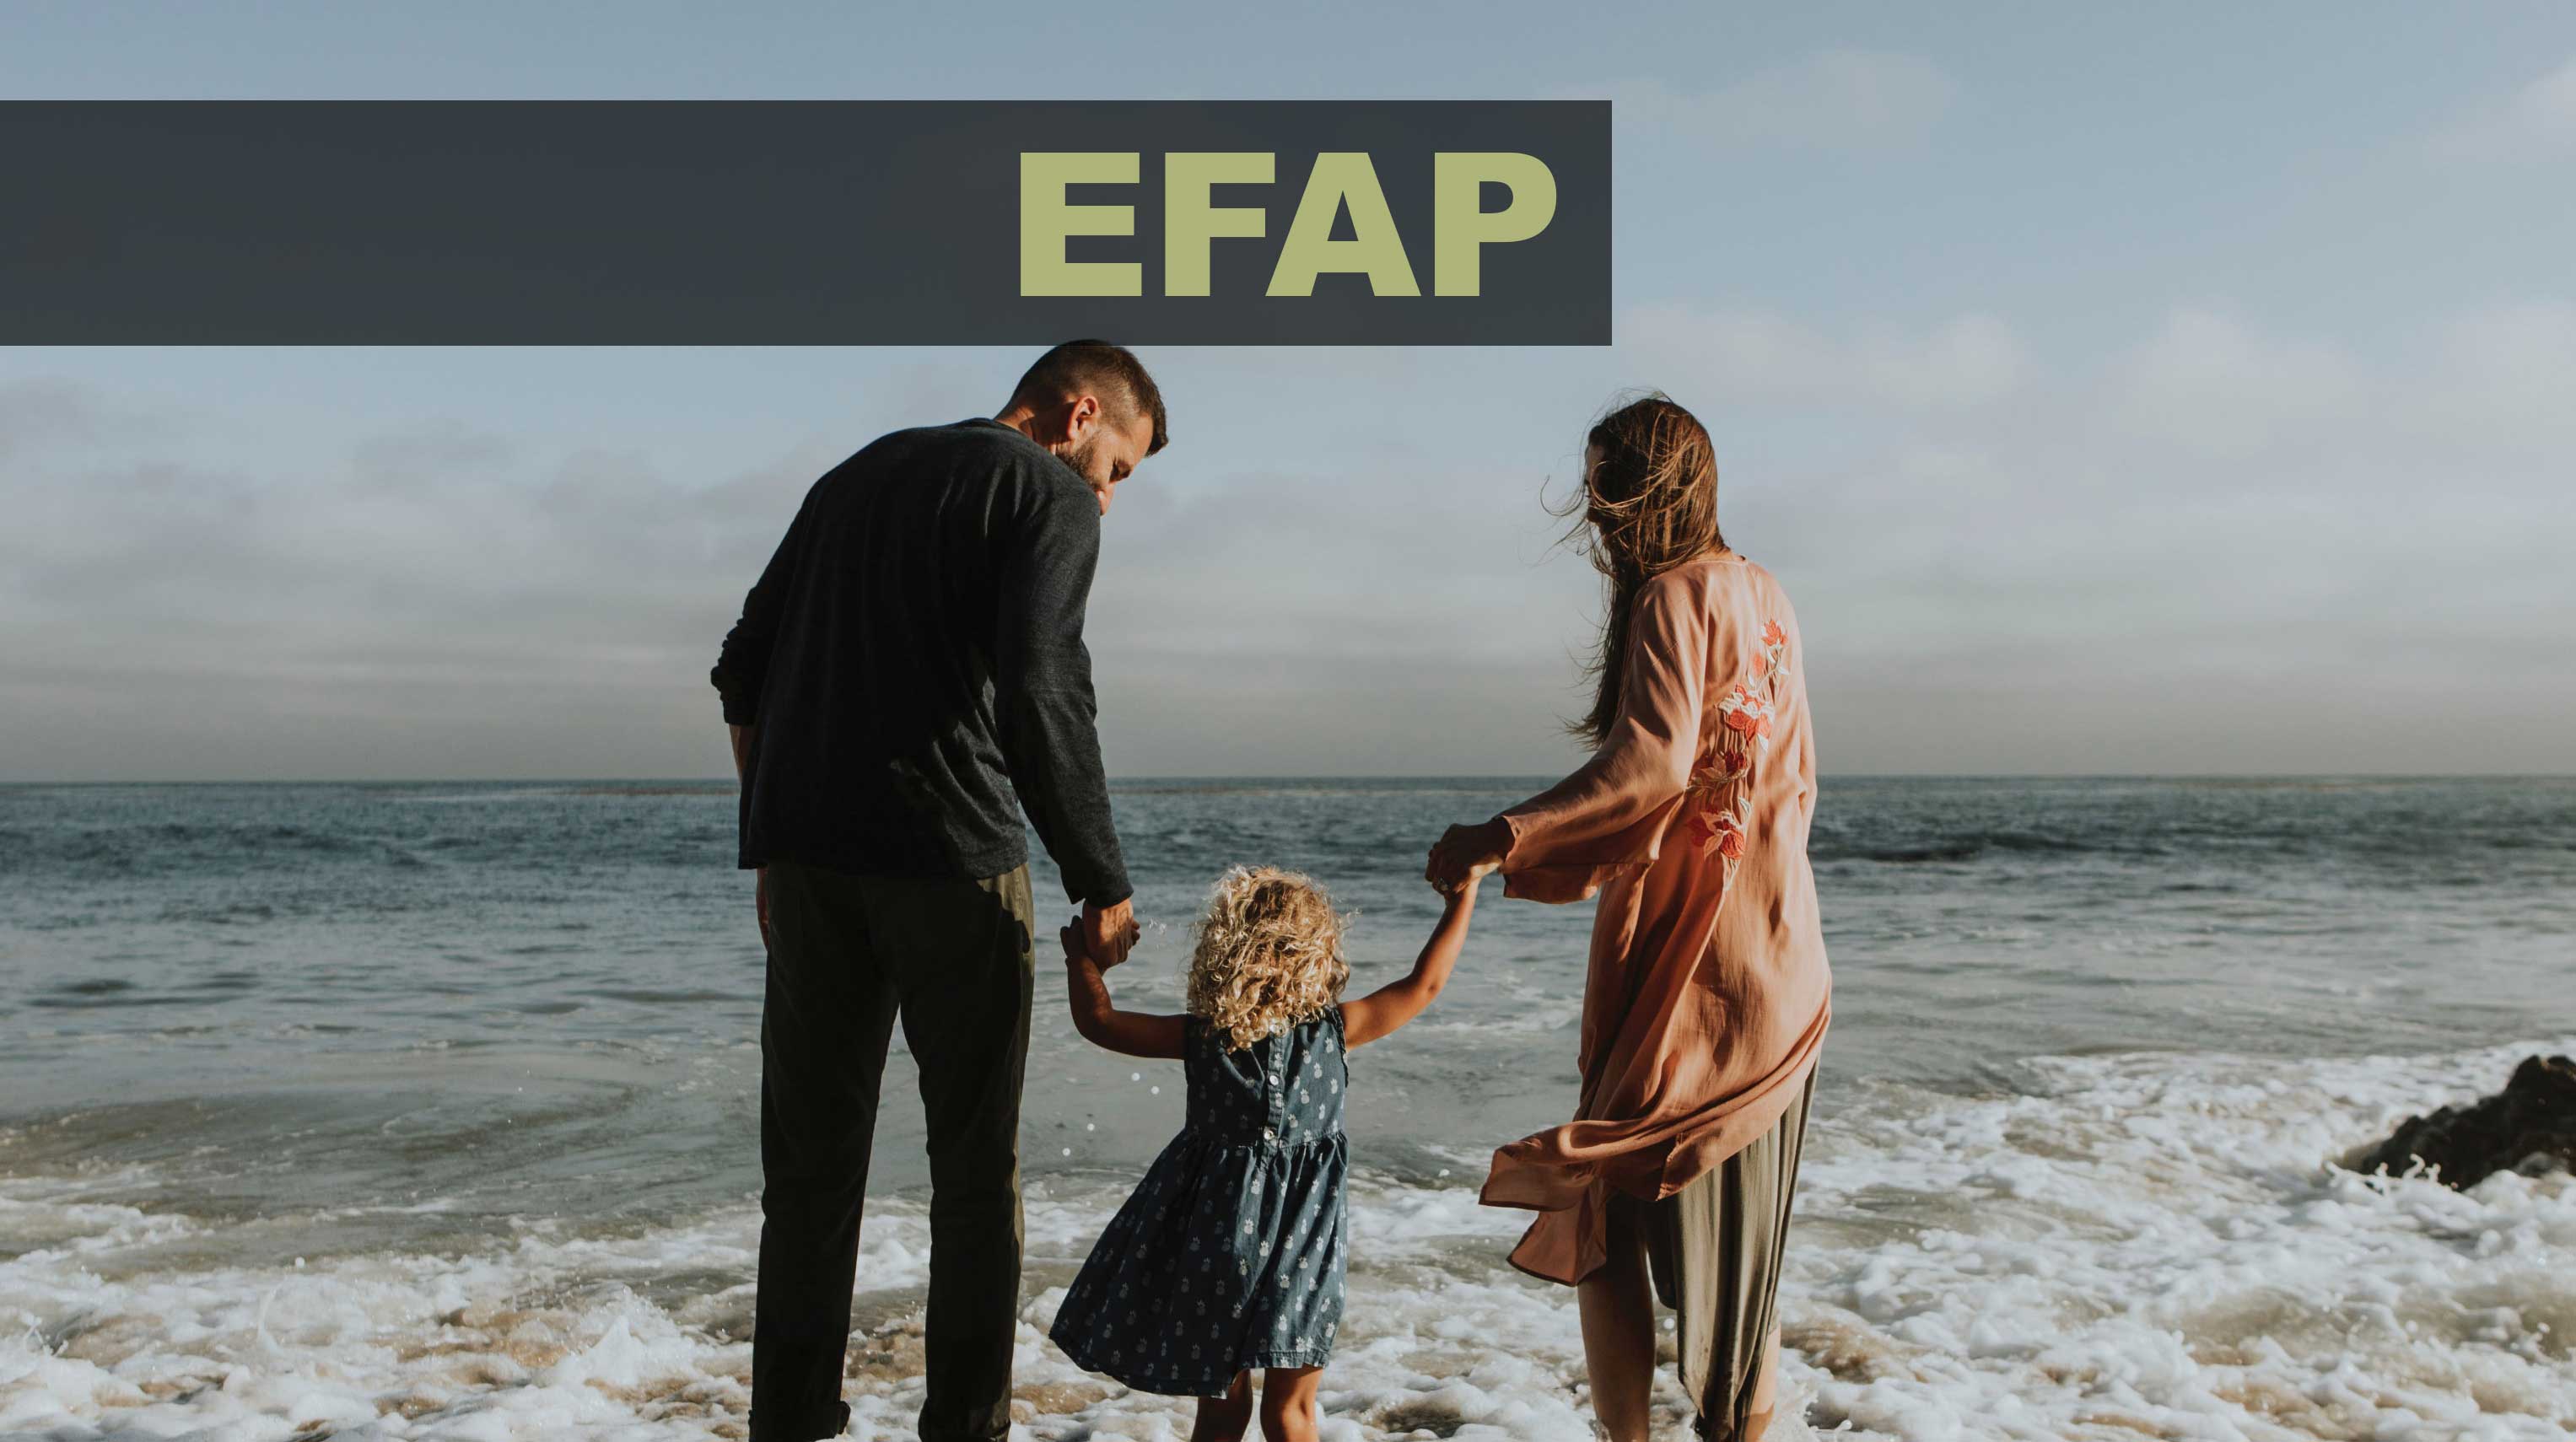 Mother, father and daughter on beach with the word "EFAP" superimposed at top of image